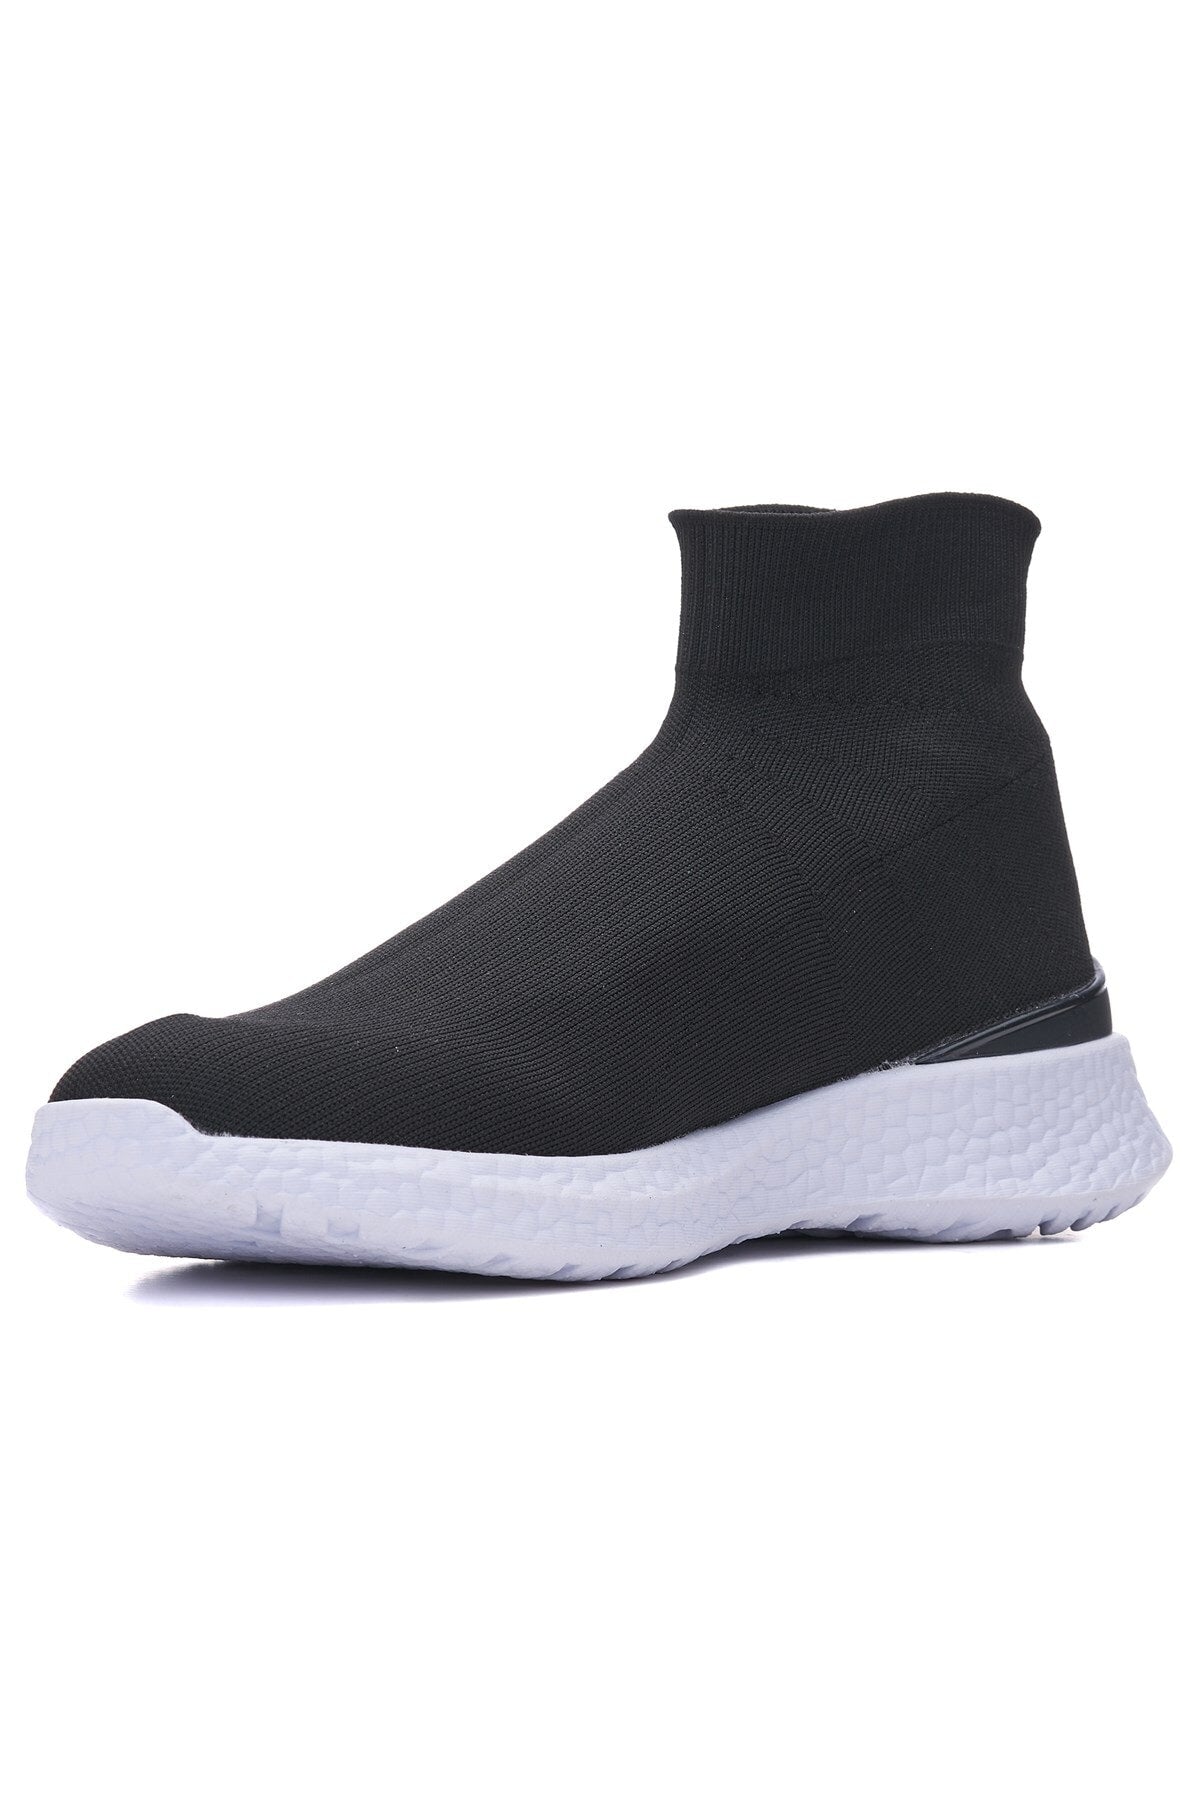 Daily Men's black and white sneaker stretch socks in the form of comfortable flexible lace-free knitwear sneakers 177-m